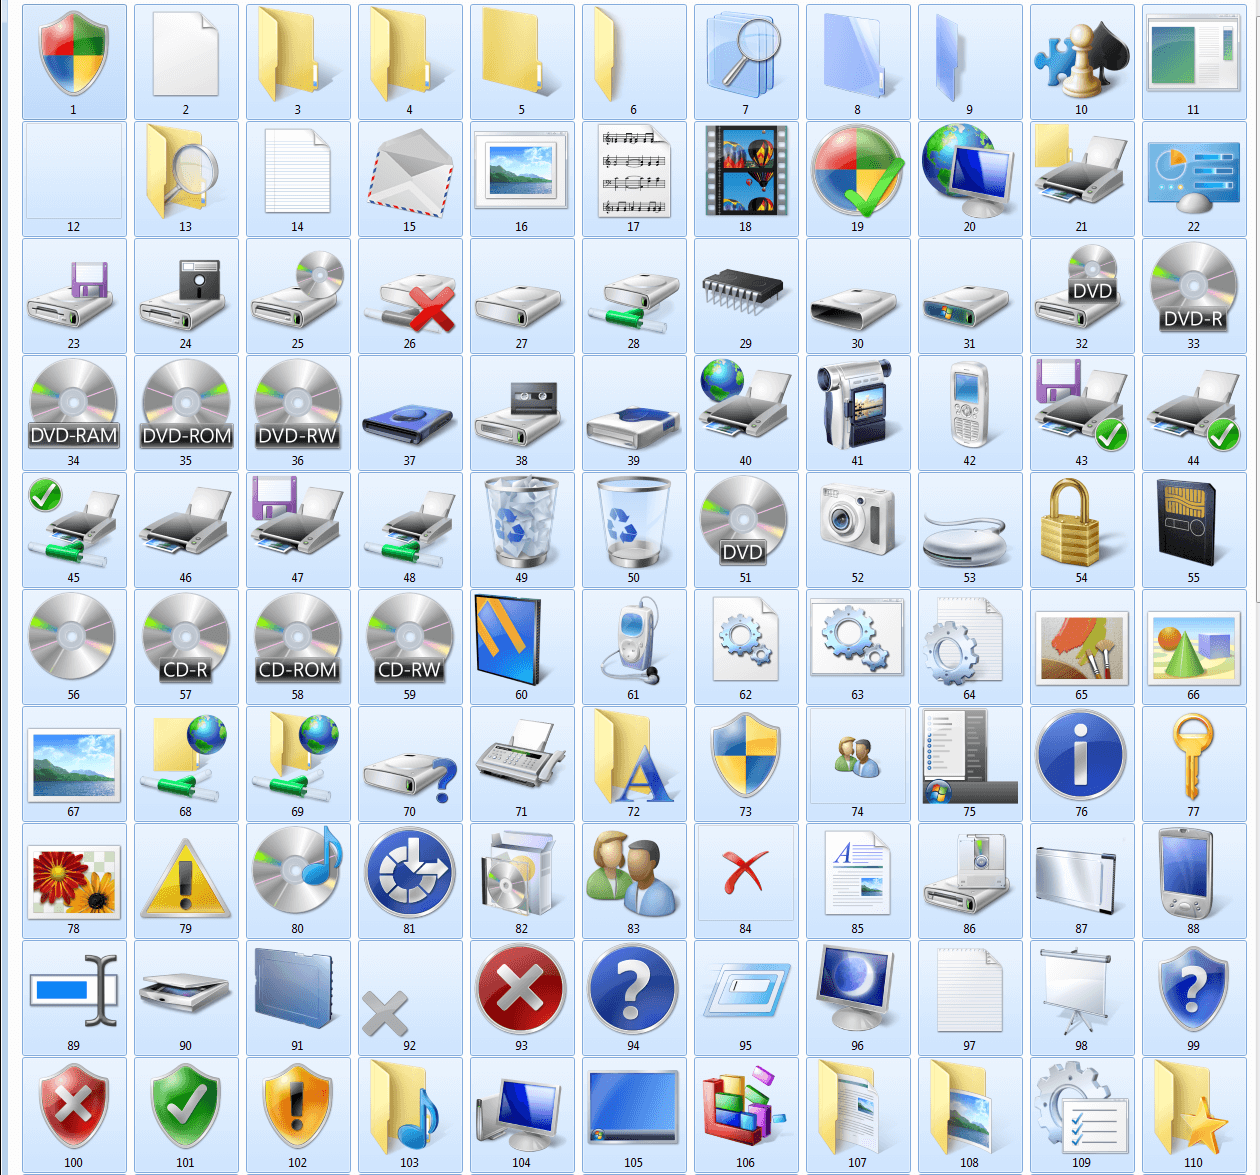 Windows 7 icons of imageres.dll (1/2)